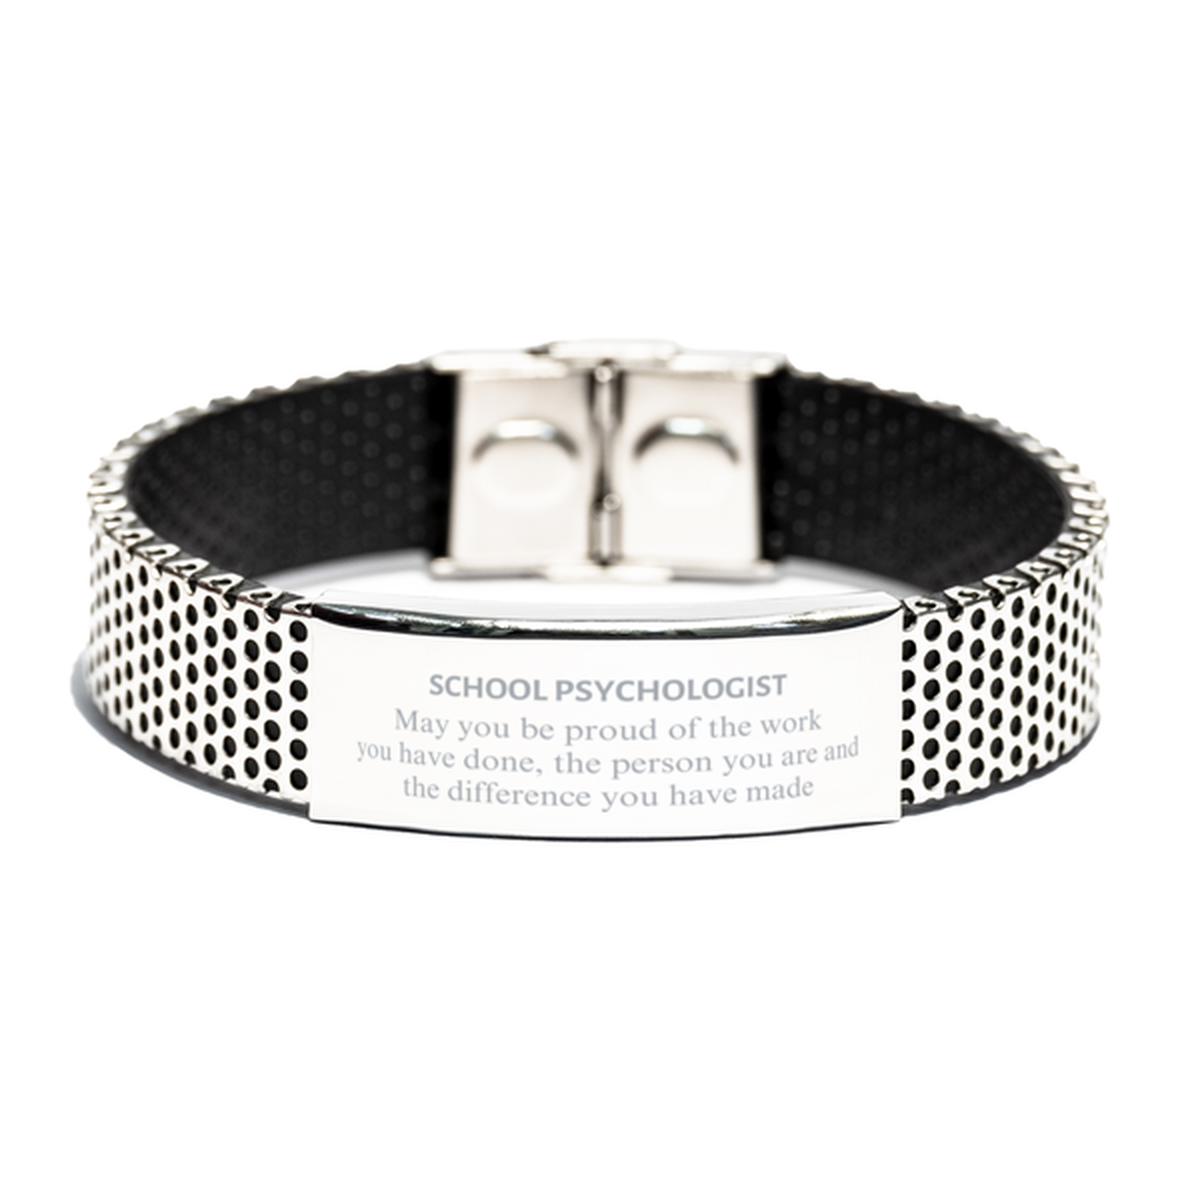 School Psychologist May you be proud of the work you have done, Retirement School Psychologist Stainless Steel Bracelet for Colleague Appreciation Gifts Amazing for School Psychologist